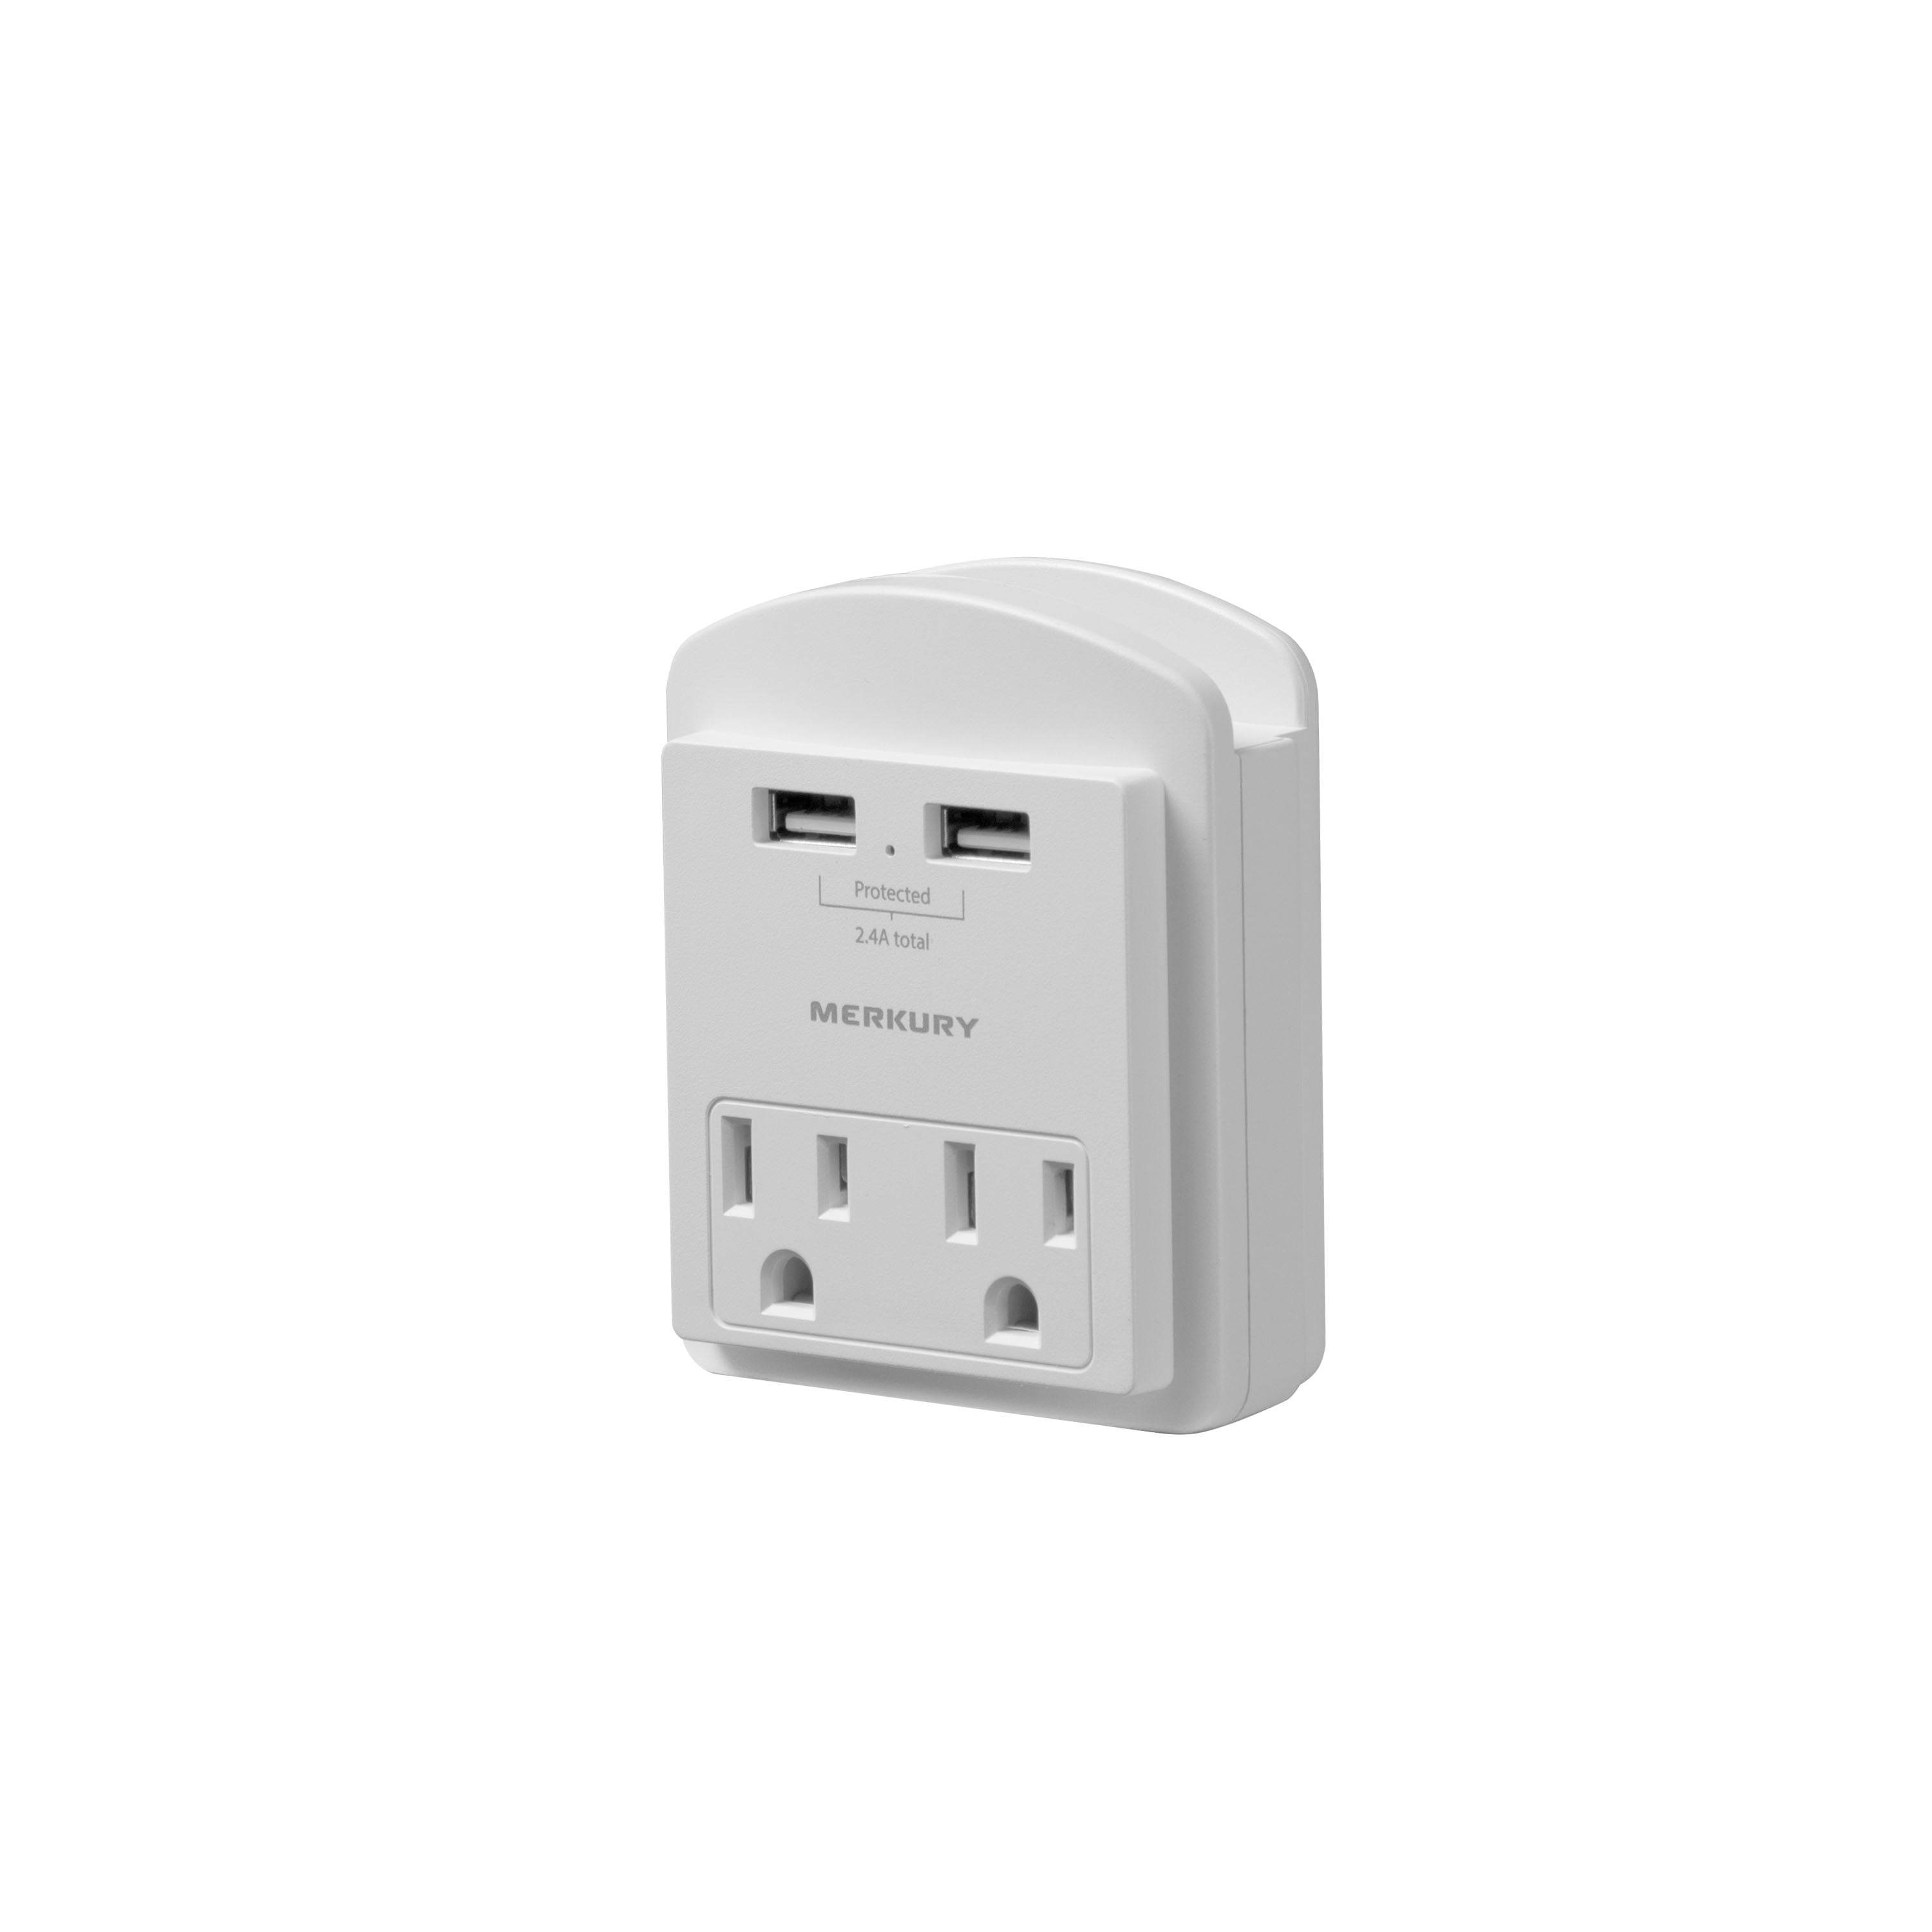 2 USB PORTS Charges PHONE iPAD Tablet iPhone Switched Mains TWIN PLUG Sockets 